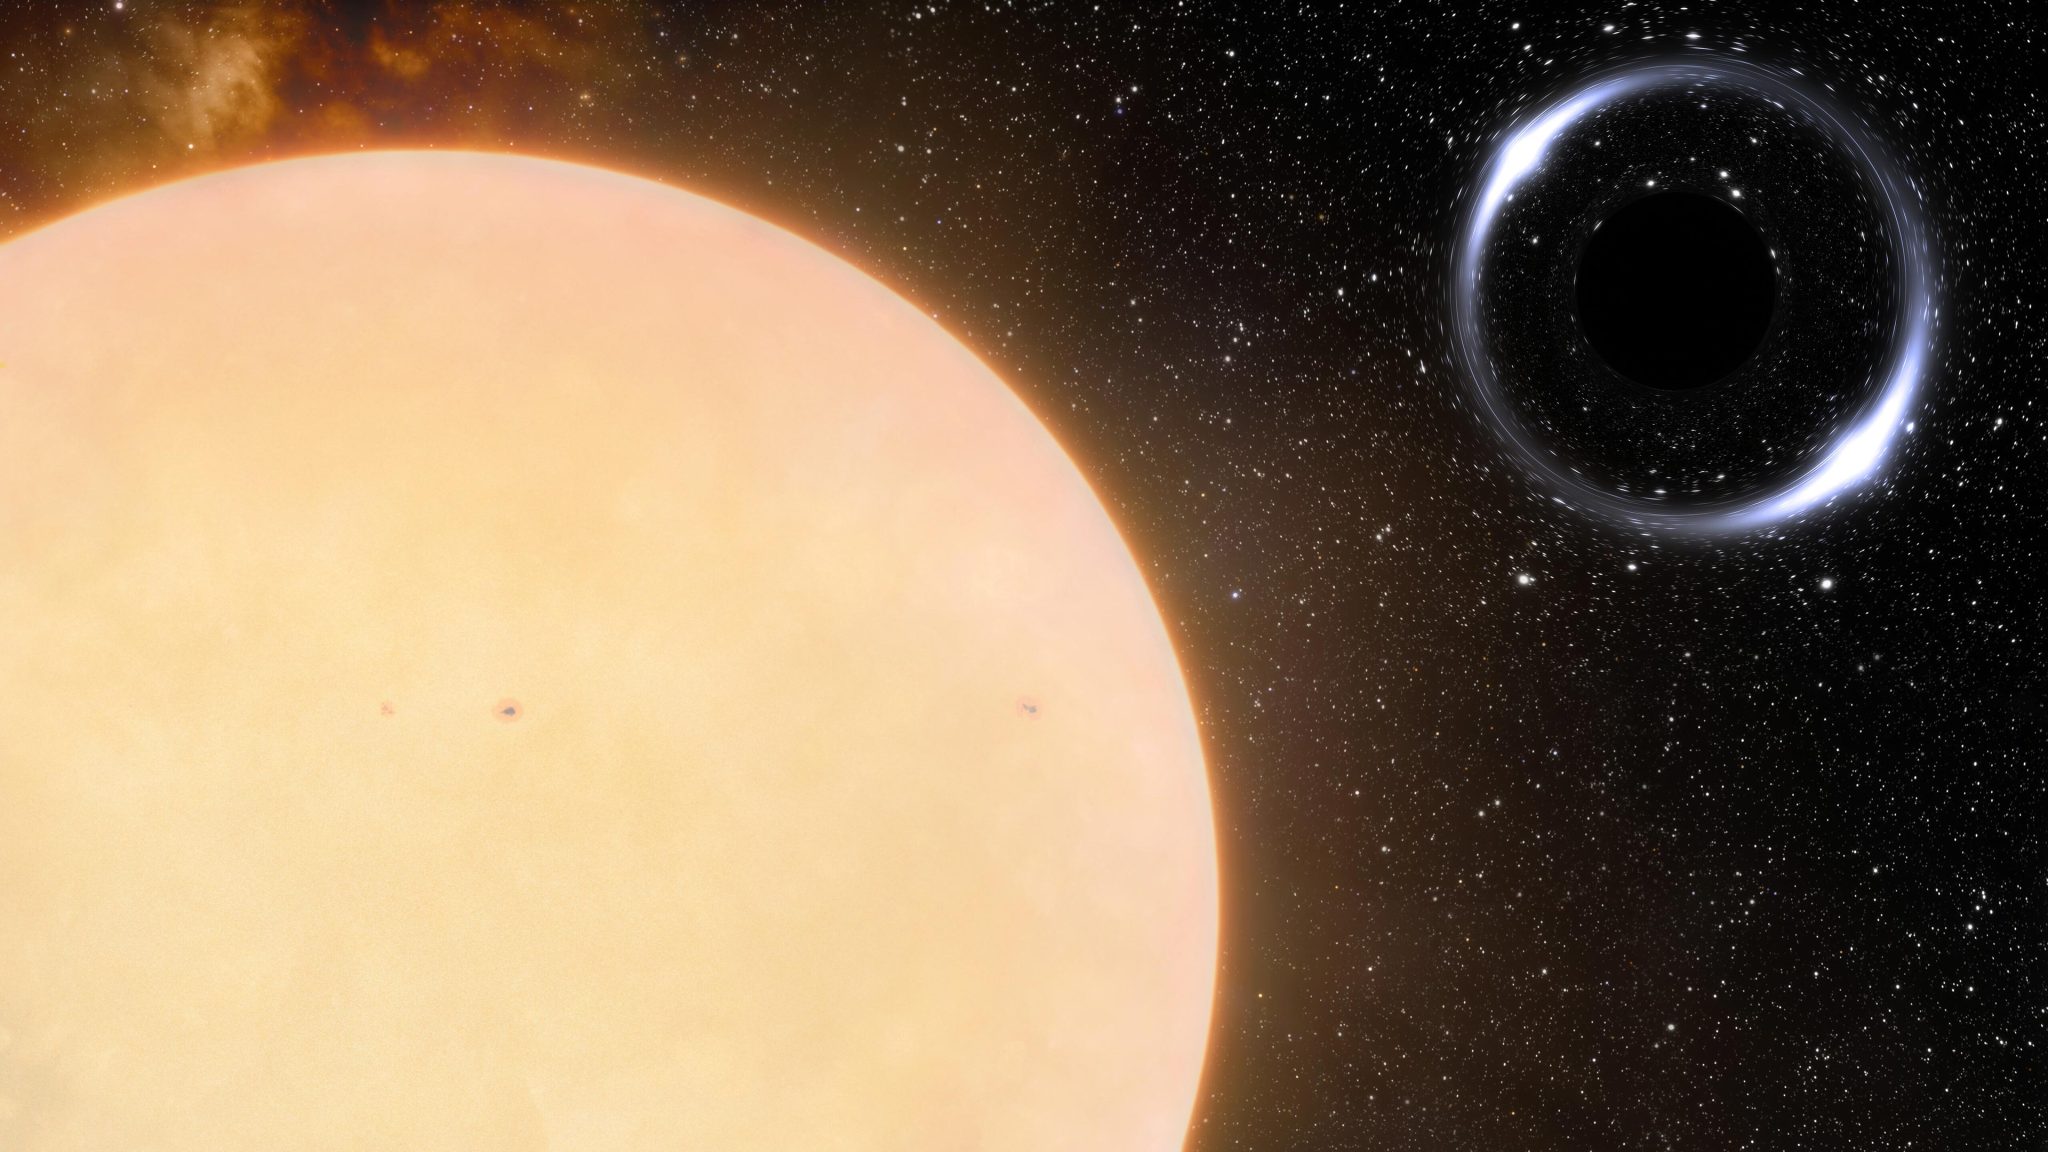 Artist's Impressions of the Nearest Black Hole to Earth and its Sun-like Companion Star